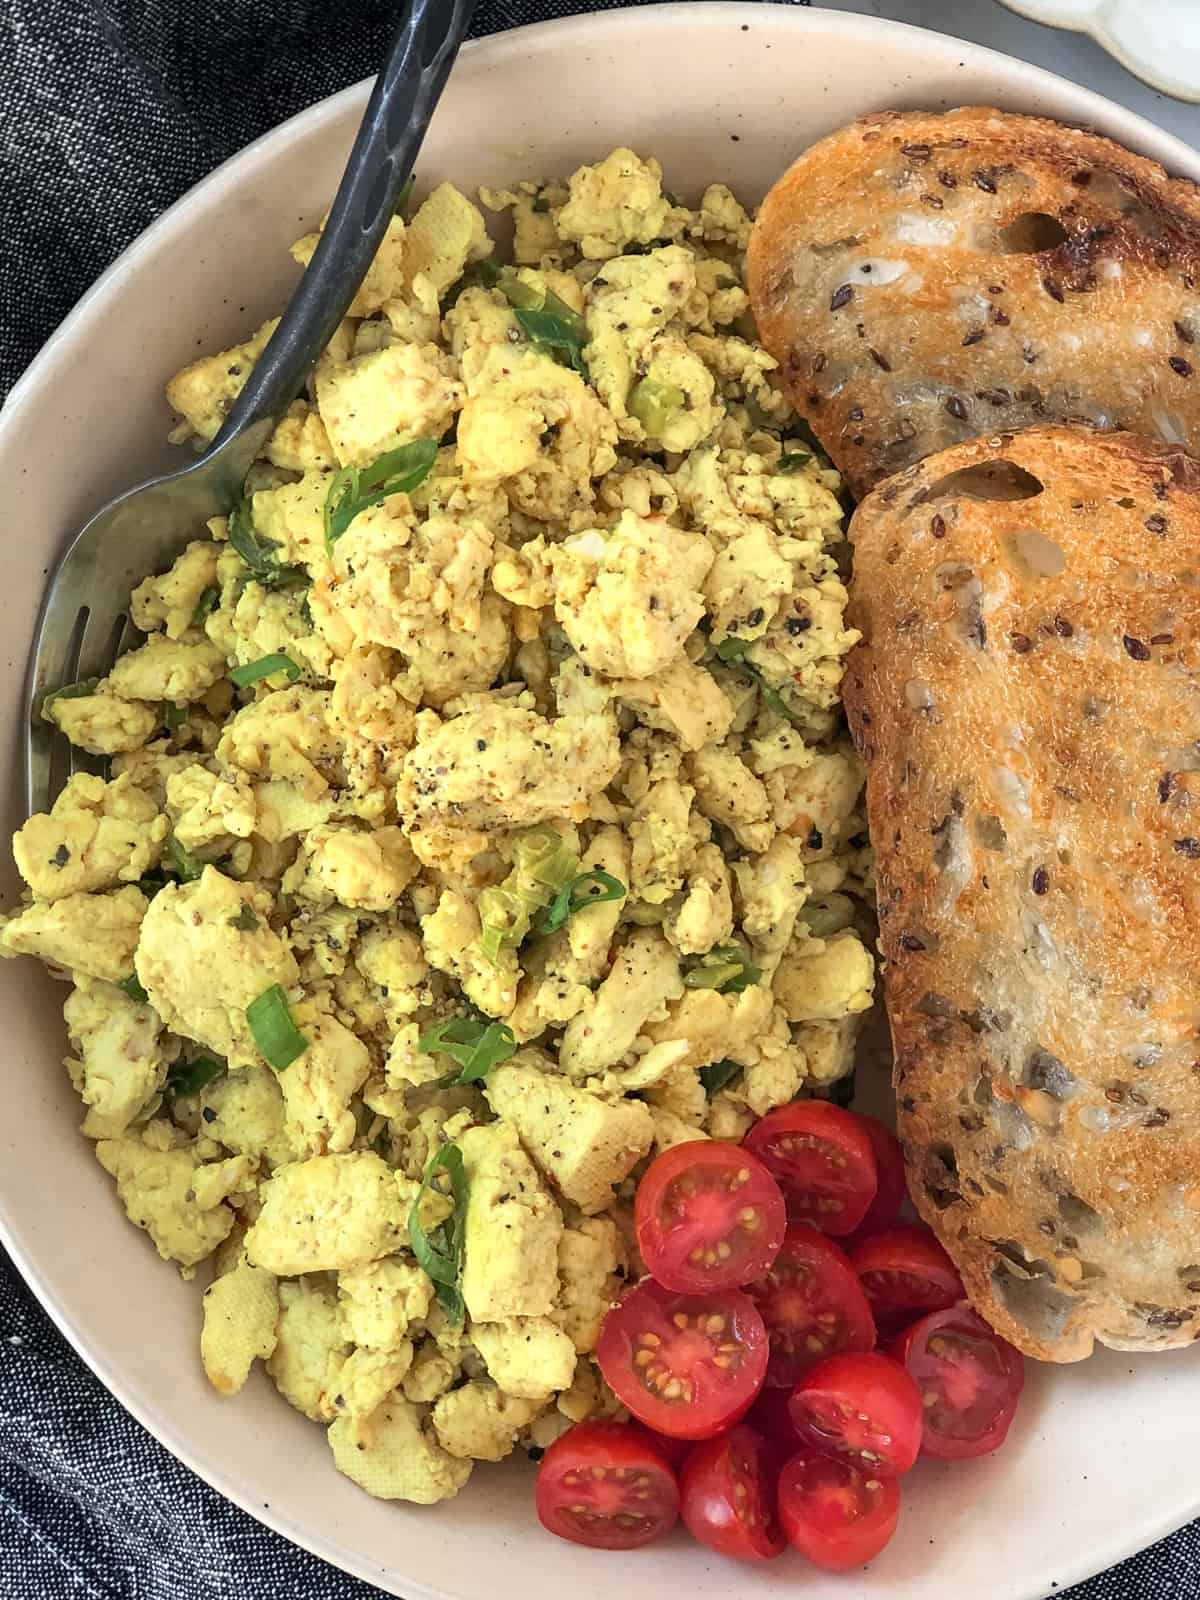 Tofu scrambled eggs and toast with tomatoes on a plate.